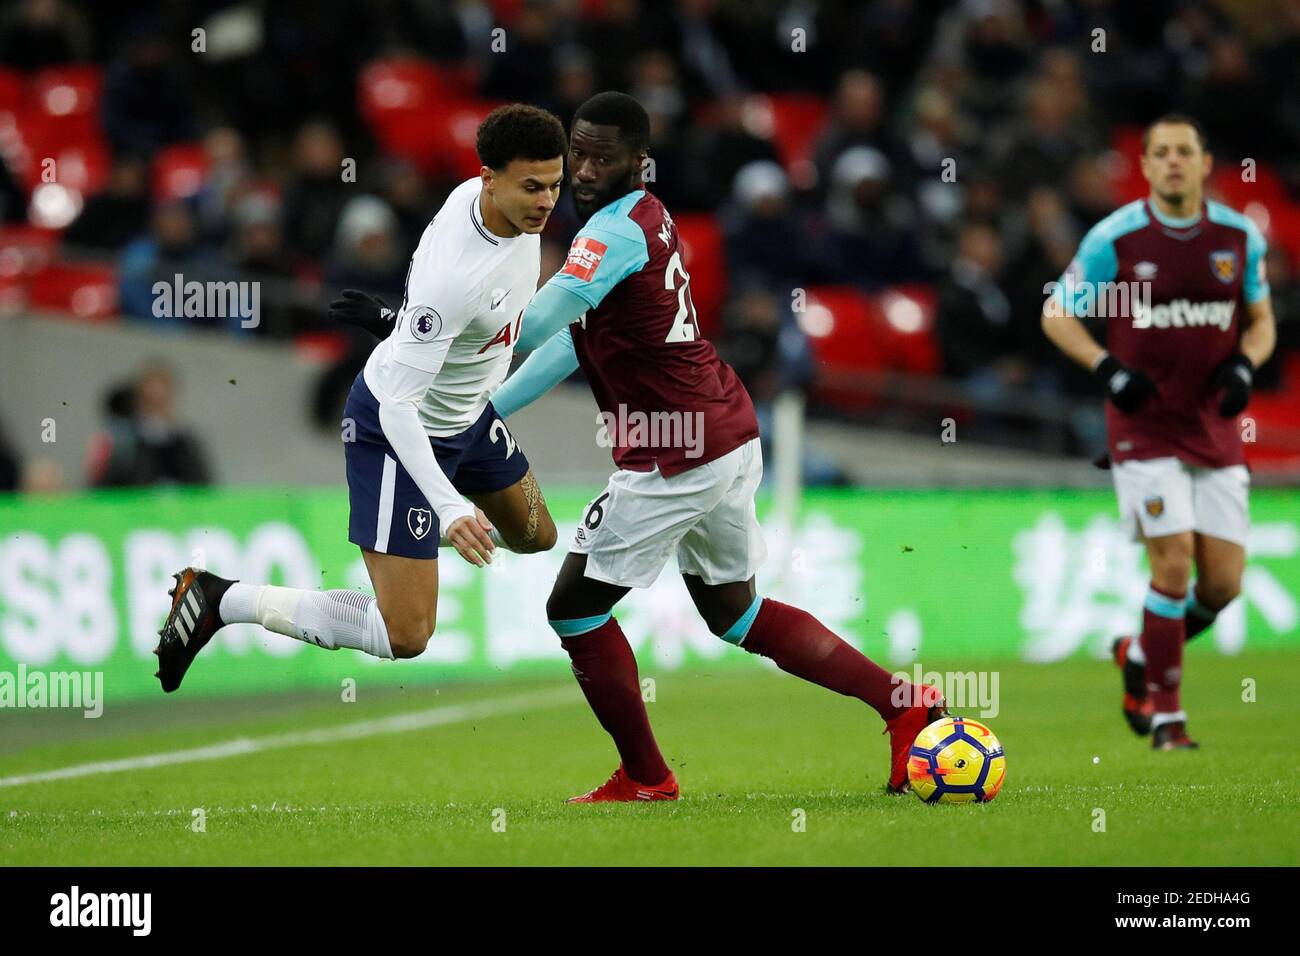 Soccer Football - Premier League - Tottenham Hotspur vs West Ham United - Wembley Stadium, London, Britain - January 4, 2018   Tottenham's Dele Alli in action with West Ham United's Arthur Masuaku    REUTERS/Eddie Keogh    EDITORIAL USE ONLY. No use with unauthorized audio, video, data, fixture lists, club/league logos or 'live' services. Online in-match use limited to 75 images, no video emulation. No use in betting, games or single club/league/player publications.  Please contact your account representative for further details. Stock Photo